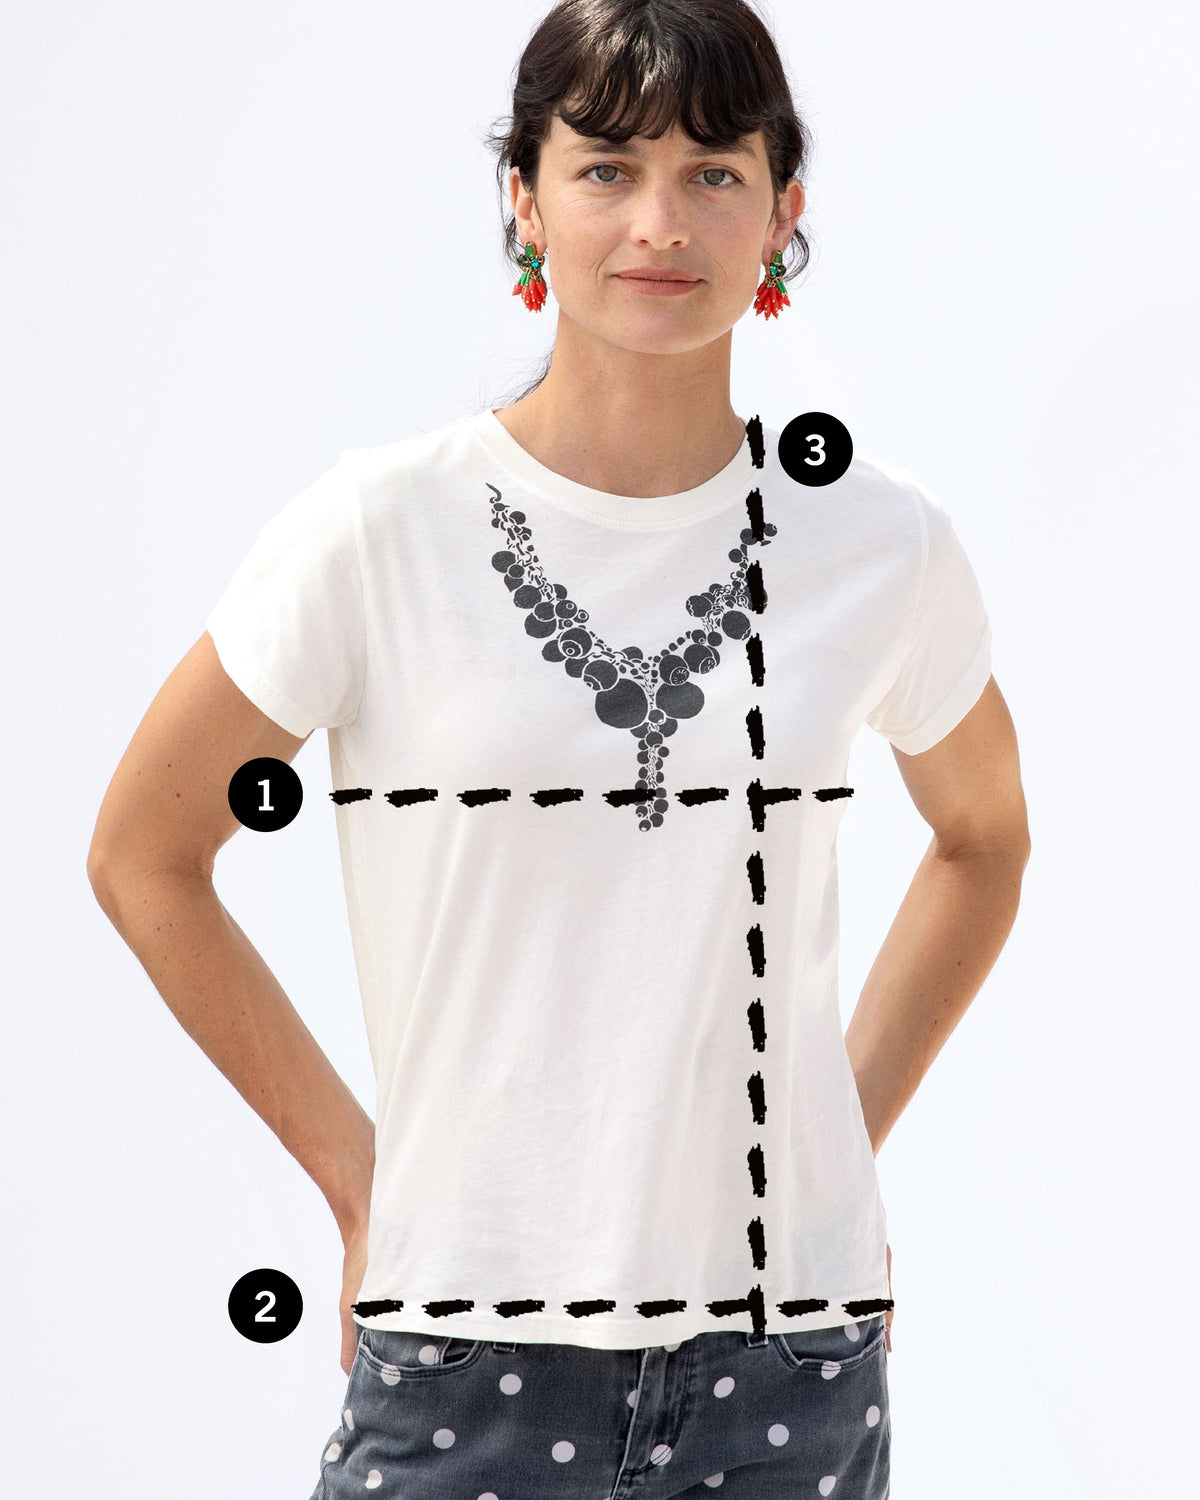 image of Danica in a white t-shirt with 3 lines depicting where the user should measure for their bust, sweep, and length measurements in comparison to the garment